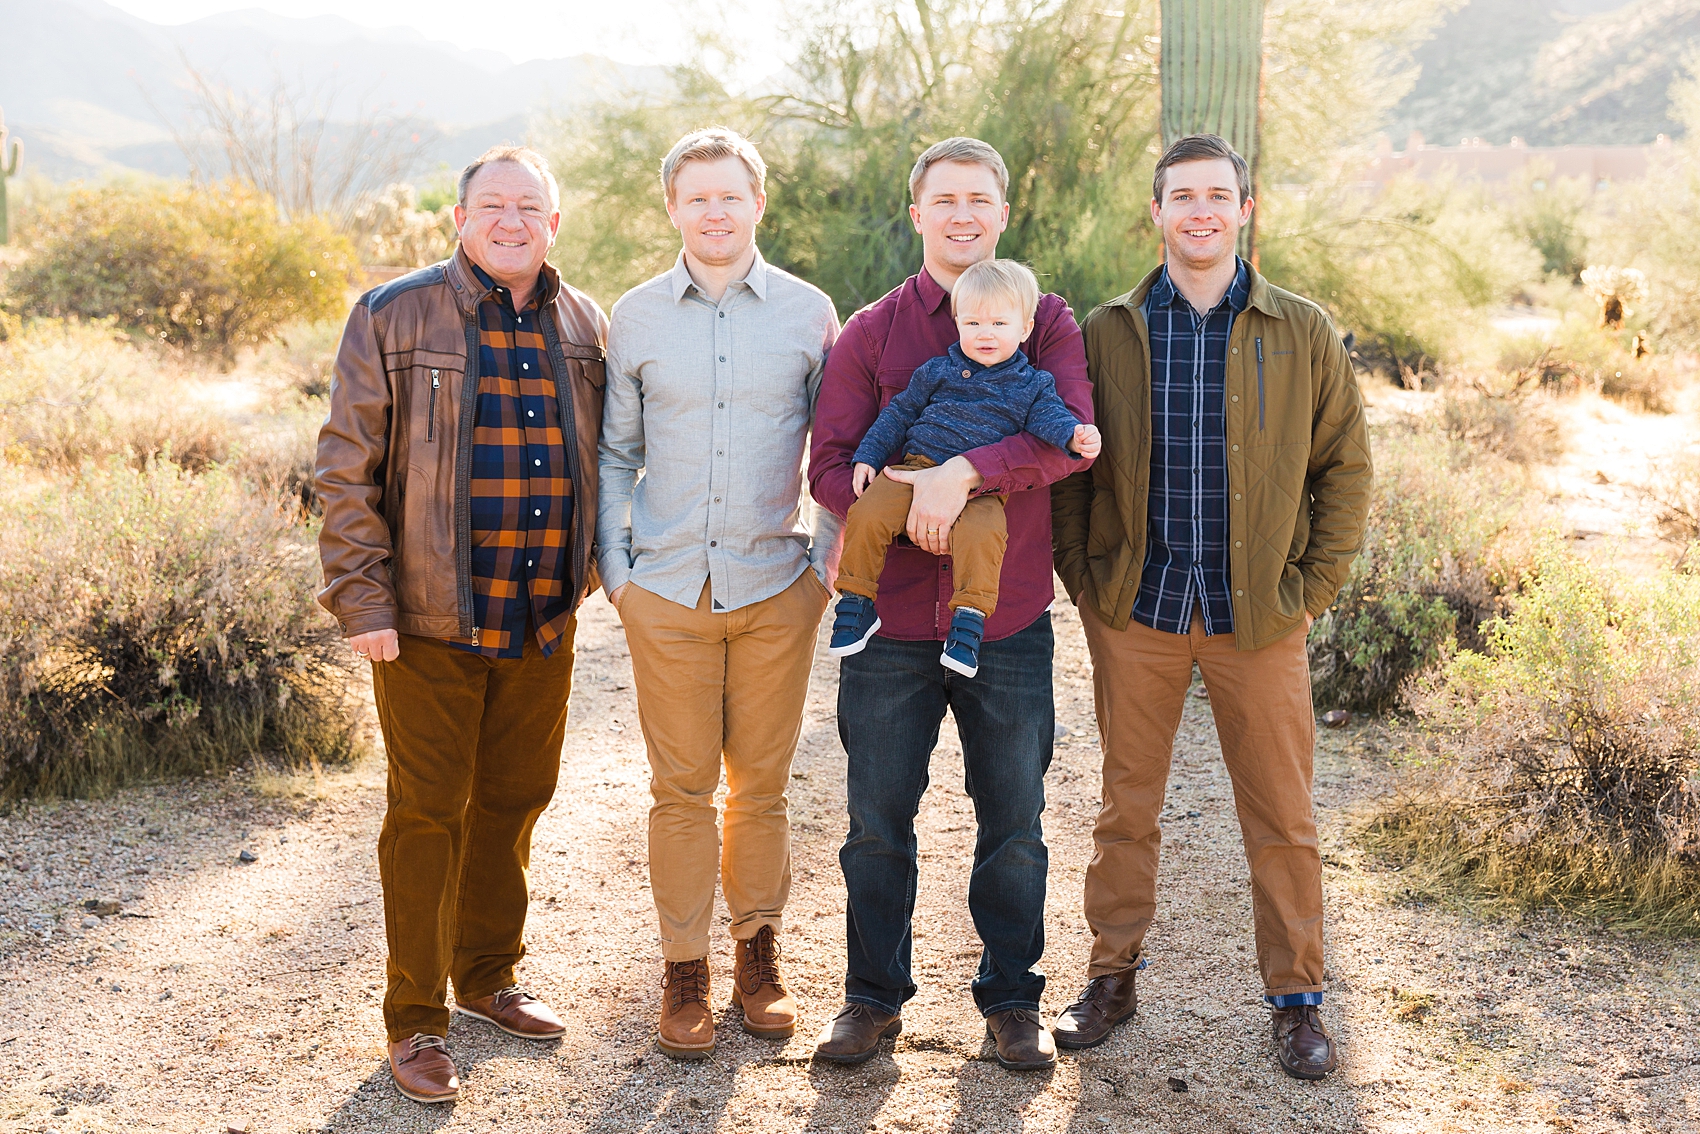 Leah Hope Photography | Scottsdale Phoenix Arizona | Desert Landscape Cactus Mountains Scenery | Sunrise Golden Sunlight | Extended Family Photos | Family Pictures | What to Wear | Family Poses | Coordinating Outfits